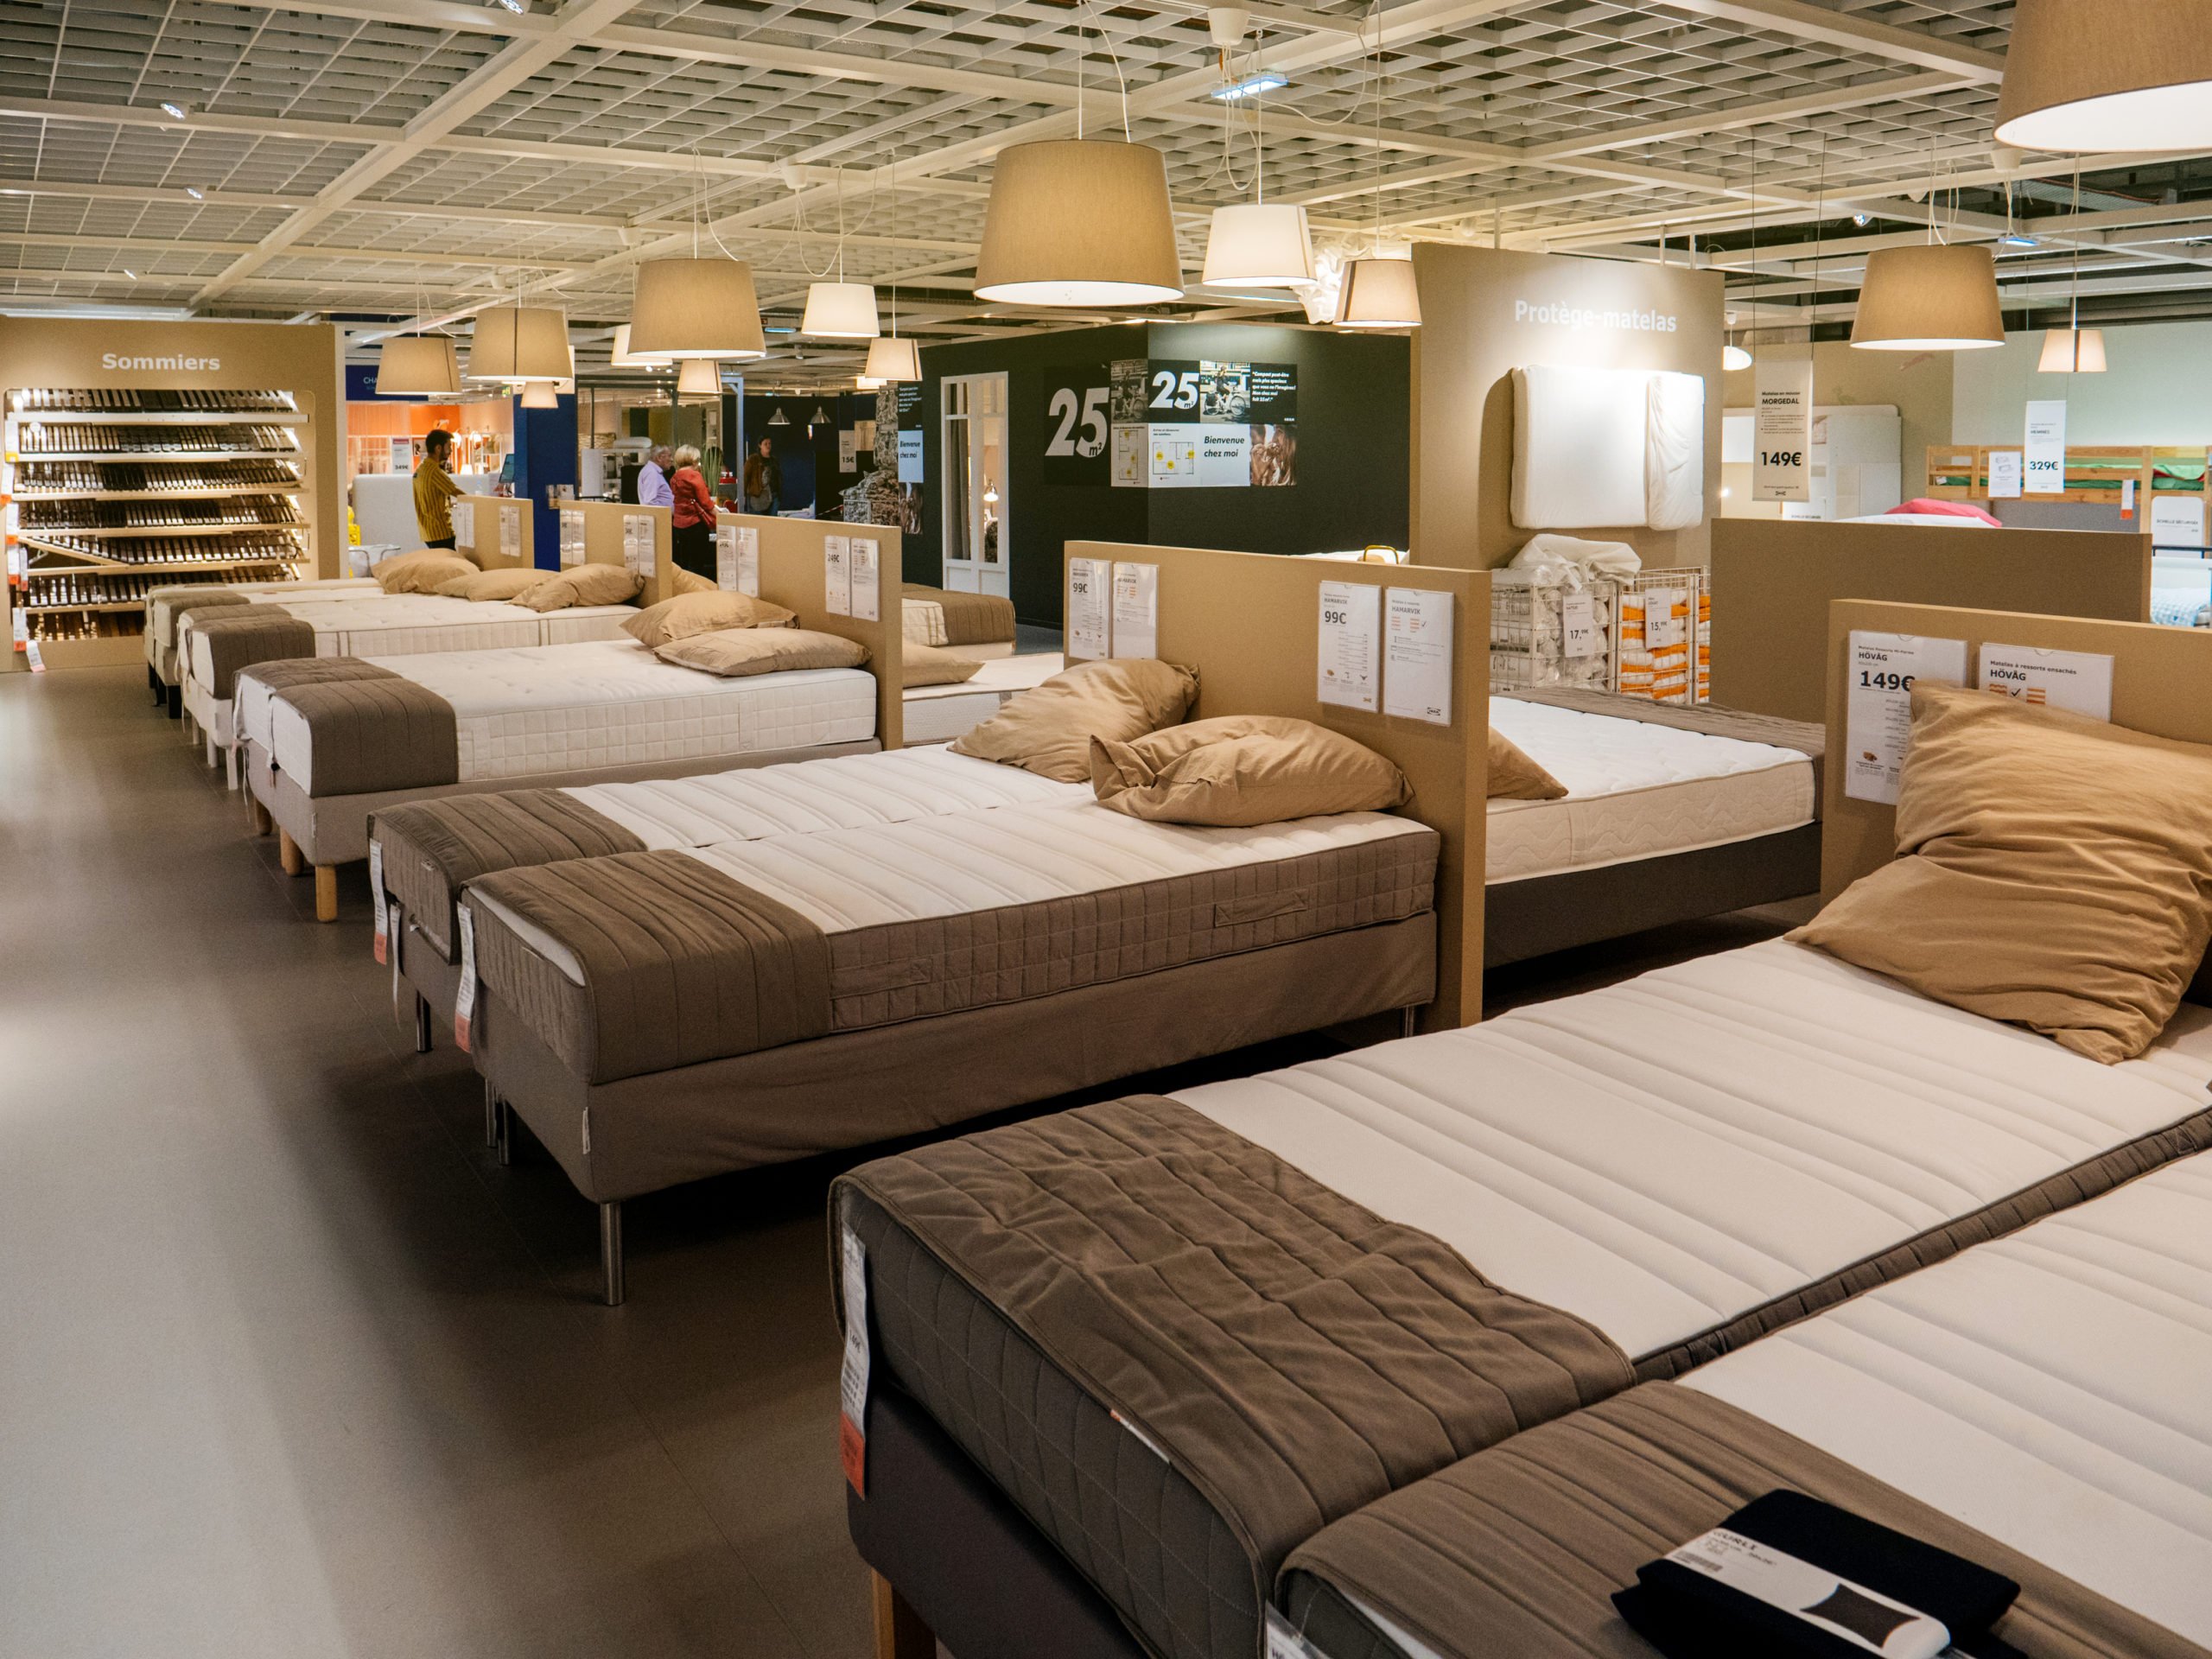 How to Choose a Mattress: Bed Buying Guide & Shopping Tips